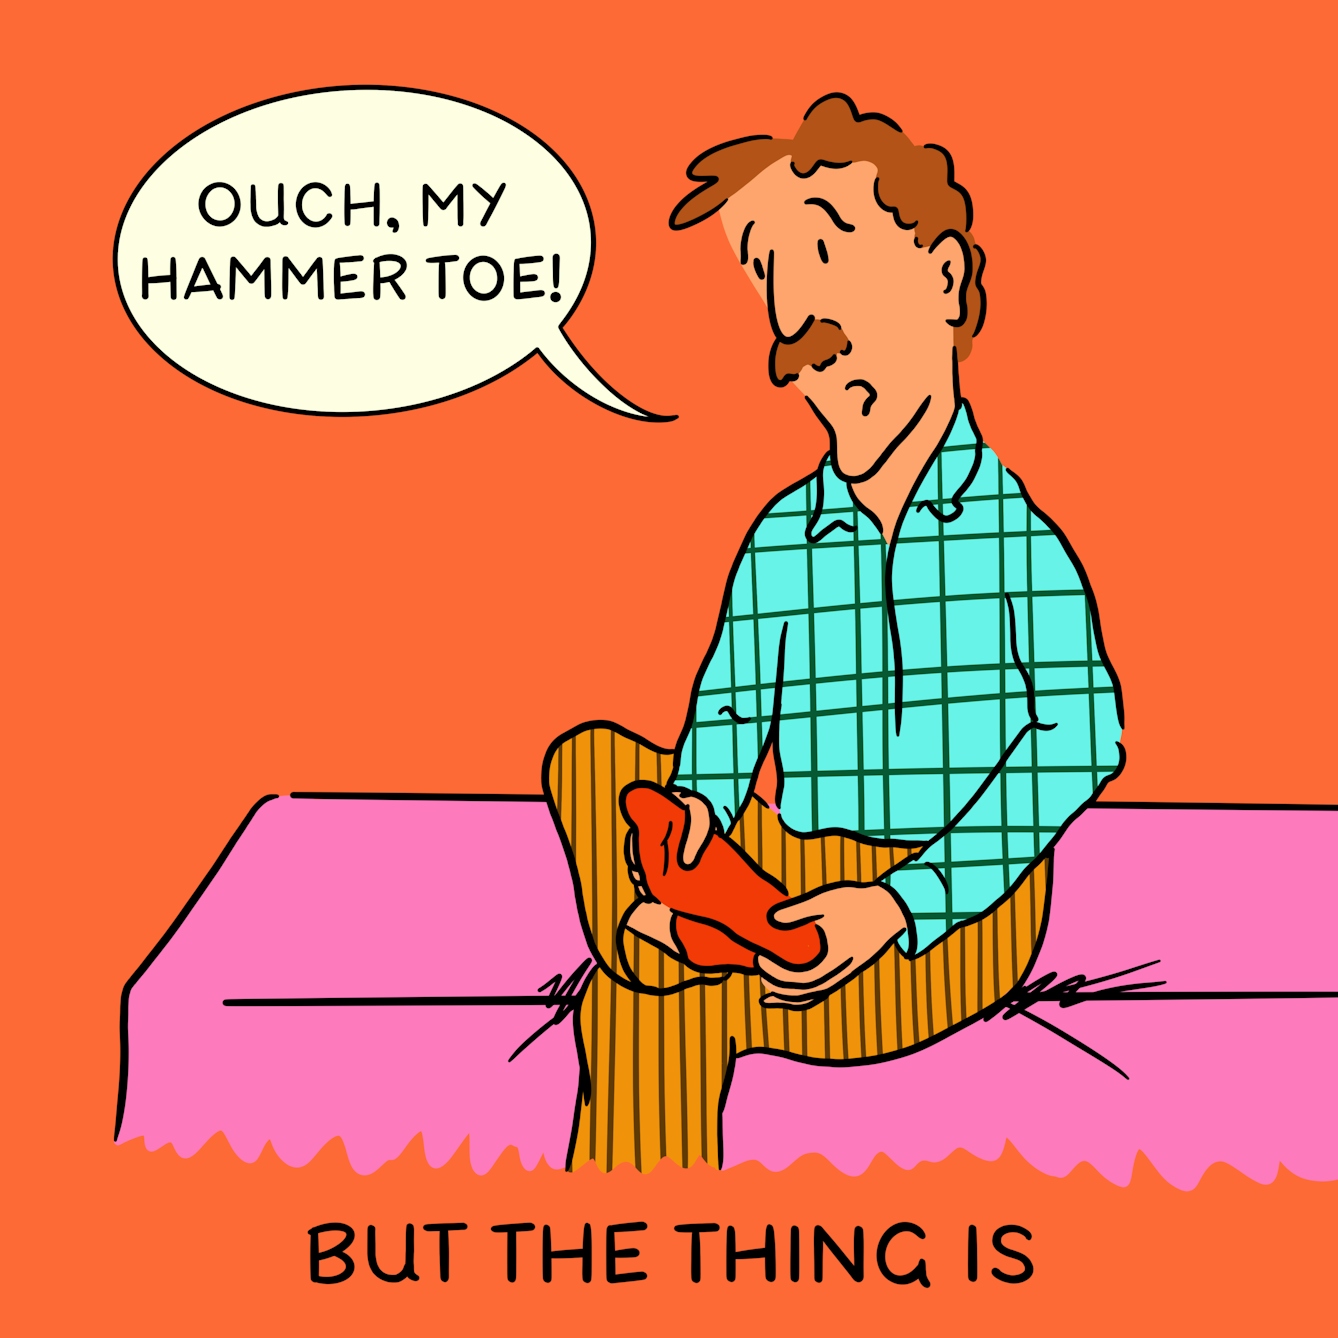 Panel 2 of a four-panel comic drawn digitally: a man with a plaid shirt and moustache clutches his red-socked right foot and exclaims "Ouch, my hammer toe!". The caption text reads "But the thing is"